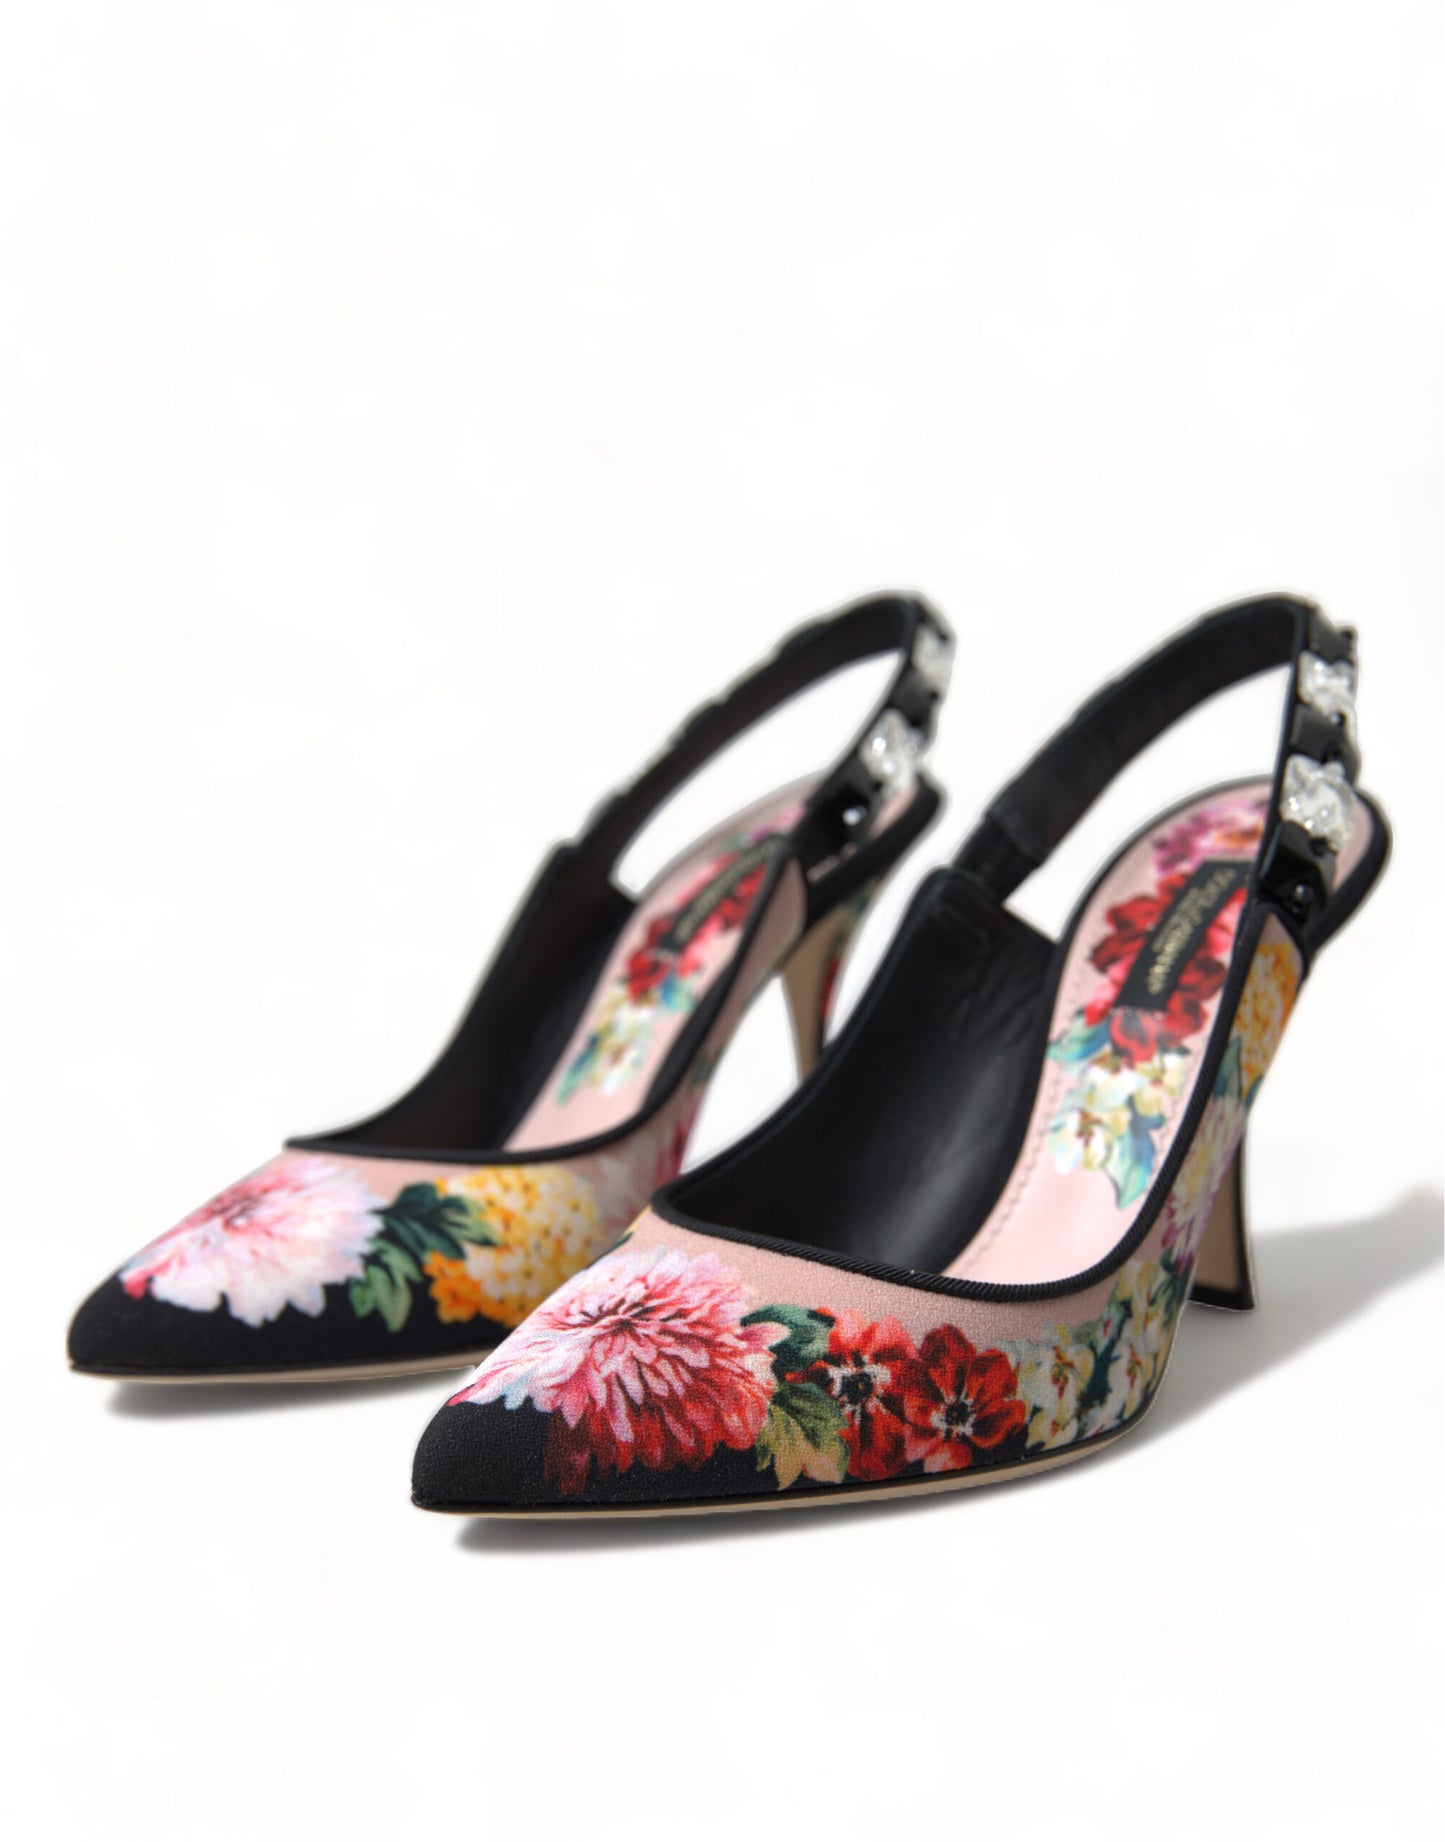 Dolce & Gabbana Floral Slingback Heels with Luxe Crystal Details